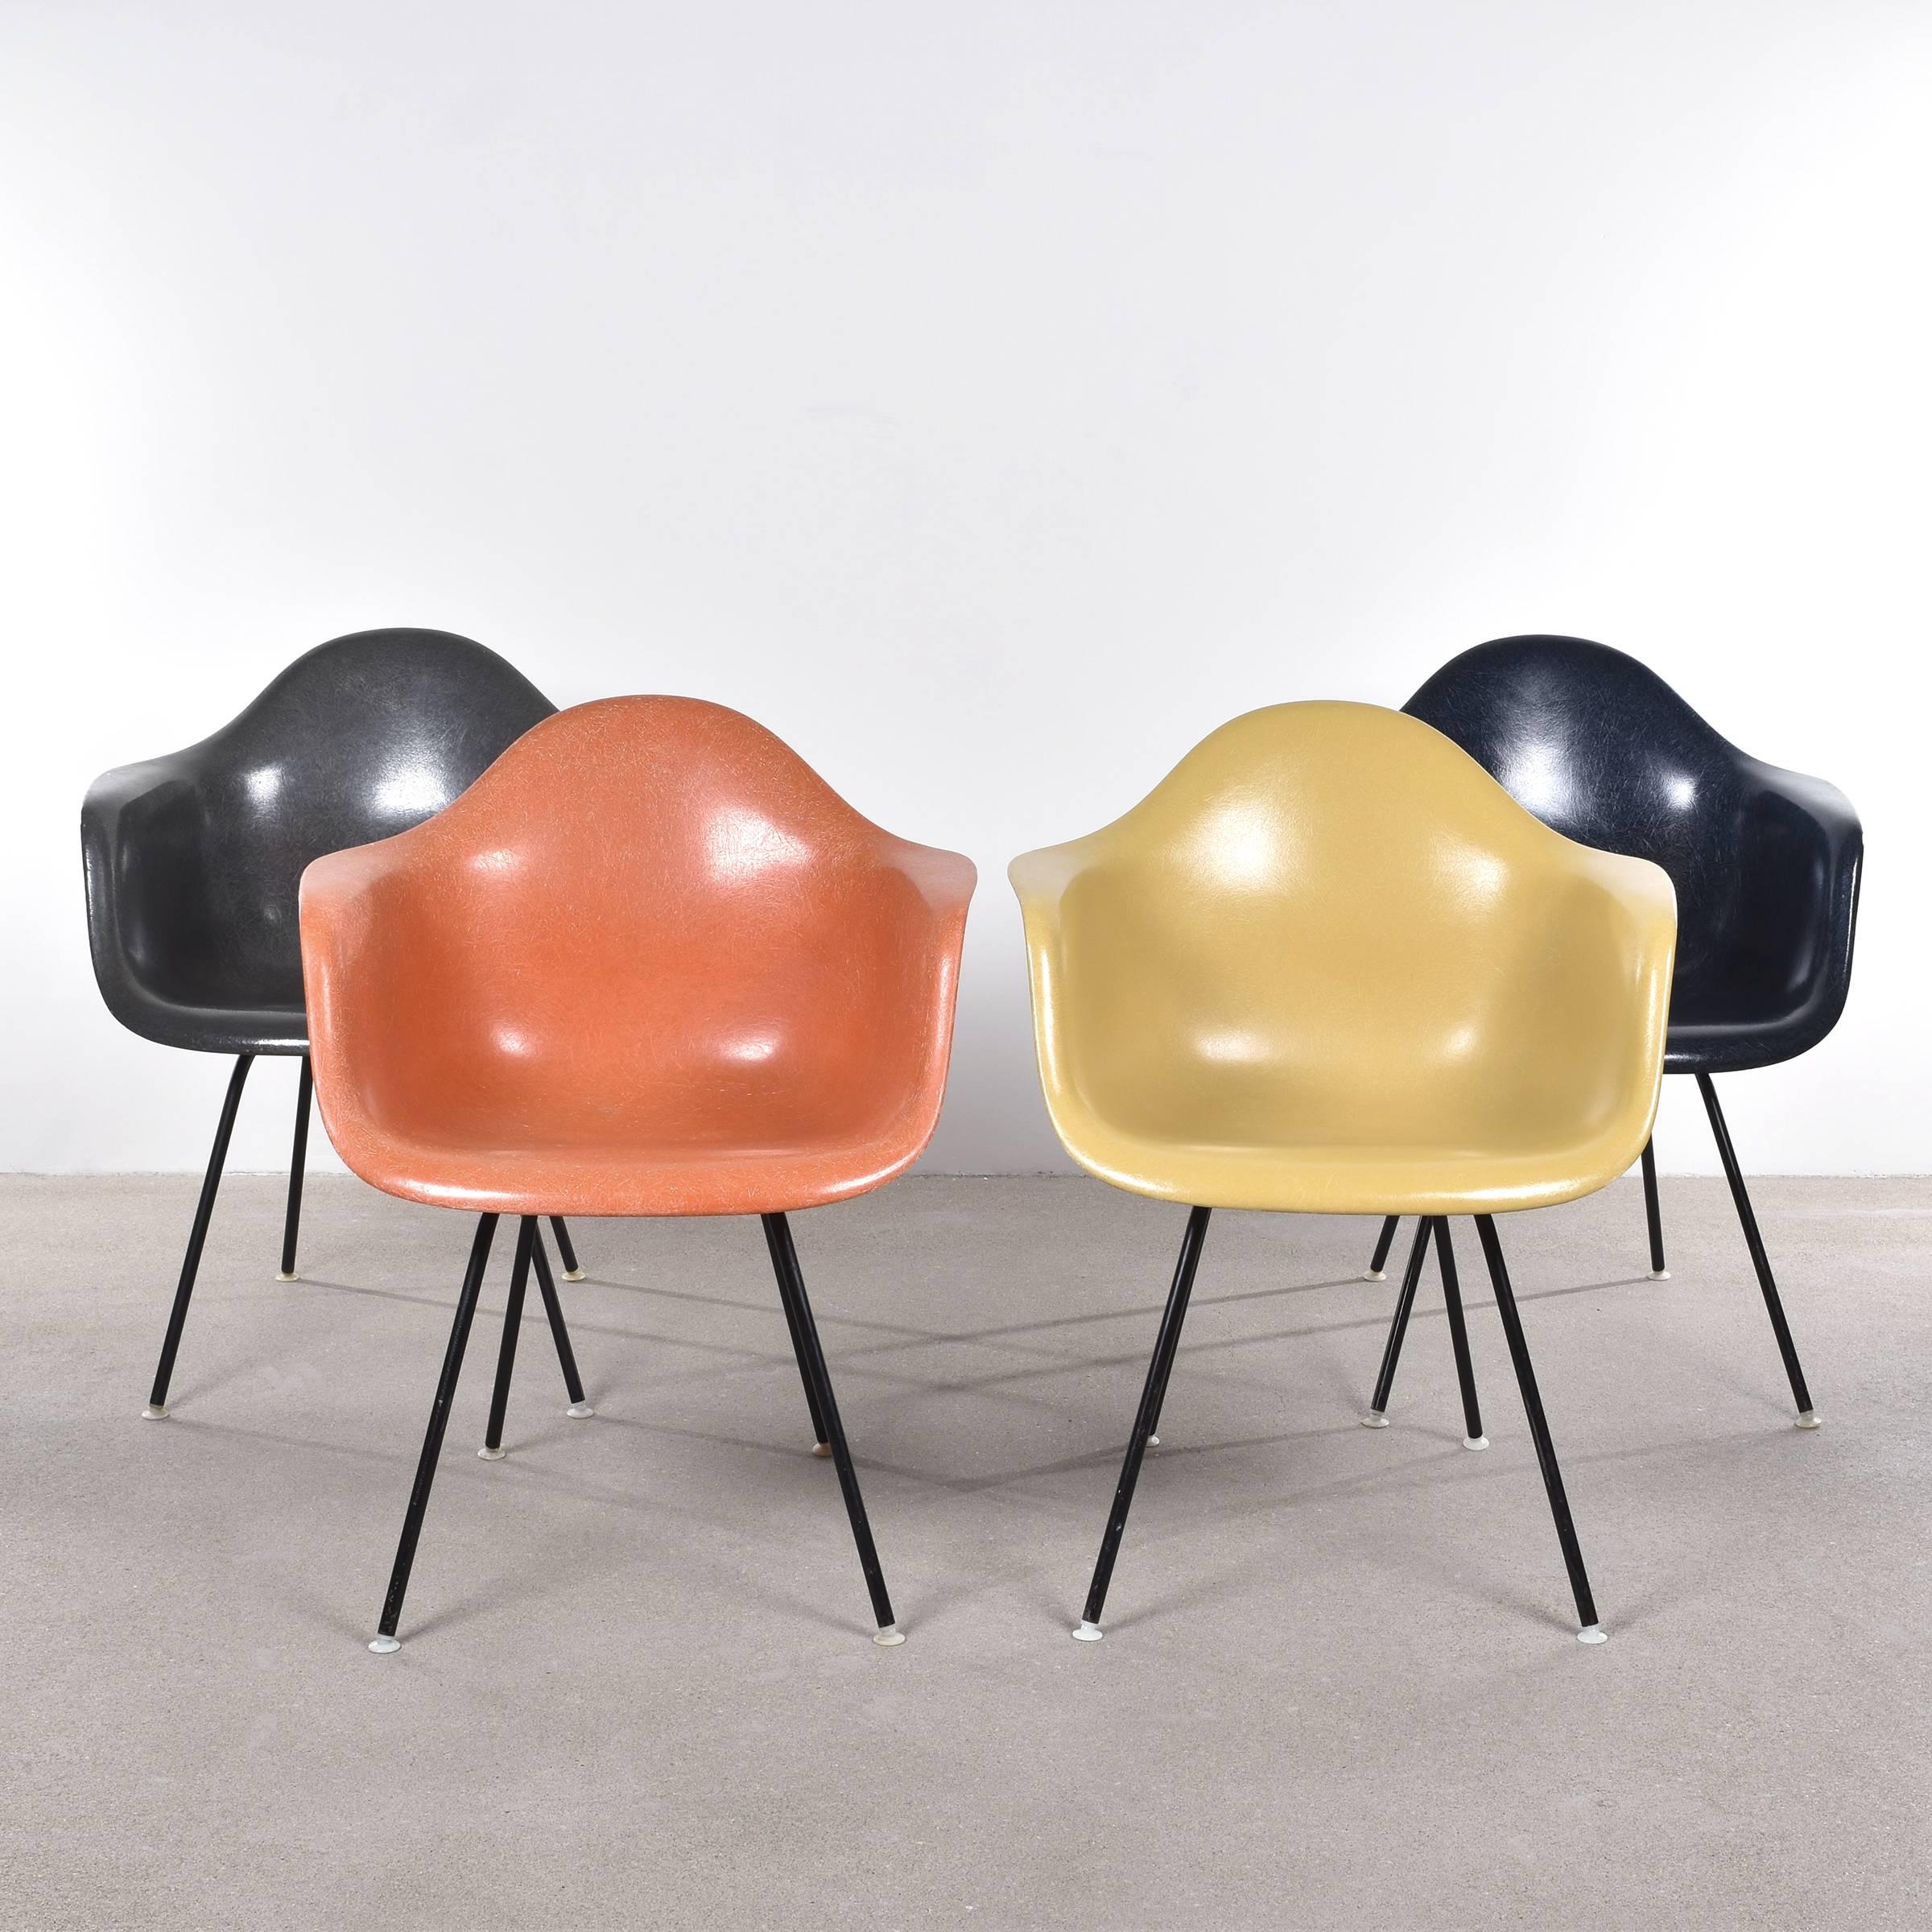 Beautiful iconic DAX chairs in the colors: Elephant hide grey, red orange, ochre light and navy blue.
Shells are in very good or excellent condition with only slight traces of use. Replaced shock mounts which guarantee save usability for the next